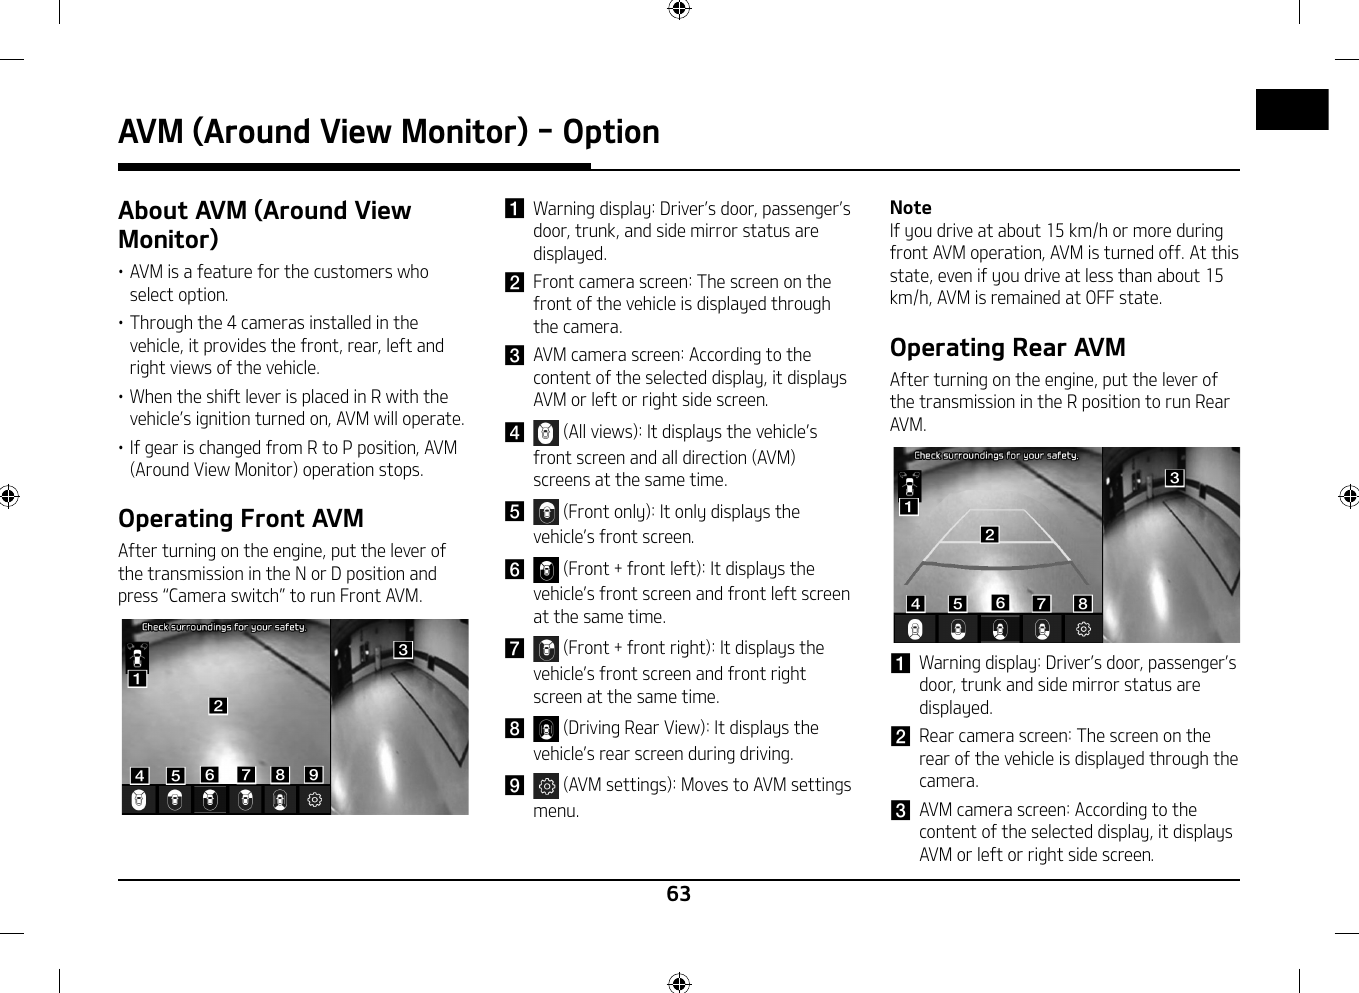 63AVM (Around View Monitor) - OptionAbout AVM (Around View Monitor)䳜 AVM is a feature for the customers who select option.䳜 Through the 4 cameras installed in the vehicle, it provides the front, rear, left and right views of the vehicle.䳜 When the shift lever is placed in R with the vehicle䳓s ignition turned on, AVM will operate.䳜 If gear is changed from R to P position, AVM (Around View Monitor) operation stops.Operating Front AVMAfter turning on the engine, put the lever of the transmission in the N or D position and press 䳖Camera switch䳗 to run Front AVM.ddeeffgghhaabbcciia Warning display: Driver䳓s door, passenger䳓s door, trunk, and side mirror status are displayed.b  Front camera screen: The screen on the front of the vehicle is displayed through the camera.c  AVM camera screen: According to the content of the selected display, it displays AVM or left or right side screen.d  (All views): It displays the vehicle䳓s front screen and all direction (AVM) screens at the same time.e  (Front only): It only displays the vehicle䳓s front screen.f  (Front + front left): It displays the vehicle䳓s front screen and front left screen at the same time.g  (Front + front right): It displays the vehicle䳓s front screen and front right screen at the same time.h  (Driving Rear View): It displays the vehicle䳓s rear screen during driving.i  (AVM settings): Moves to AVM settings menu.NoteIf you drive at about 15 km/h or more during front AVM operation, AVM is turned off. At this state, even if you drive at less than about 15 km/h, AVM is remained at OFF state.Operating Rear AVMAfter turning on the engine, put the lever of the transmission in the R position to run Rear AVM.ddeeffgghhaabbcca Warning display: Driver䳓s door, passenger䳓s door, trunk and side mirror status are displayed.b Rear camera screen: The screen on the rear of the vehicle is displayed through the camera.c AVM camera screen: According to the content of the selected display, it displays AVM or left or right side screen.AVM (Around View Monitor) - Option